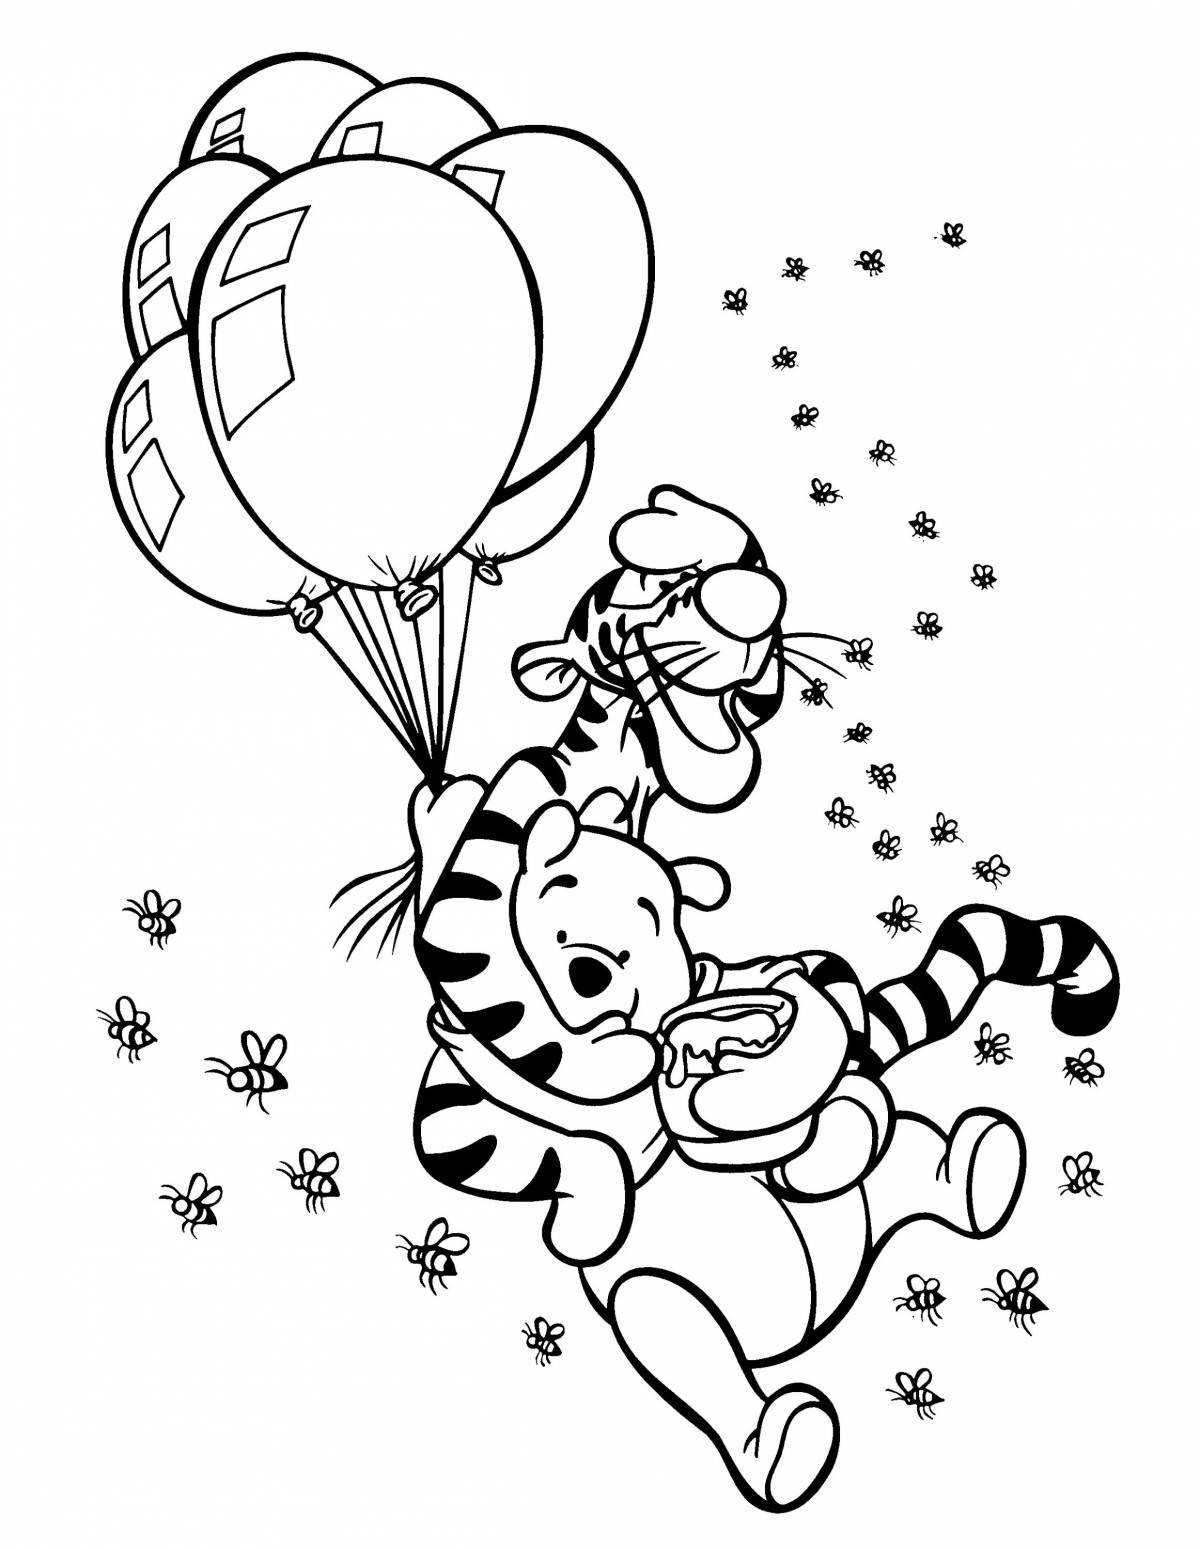 Rampant Winnie the Pooh with a balloon